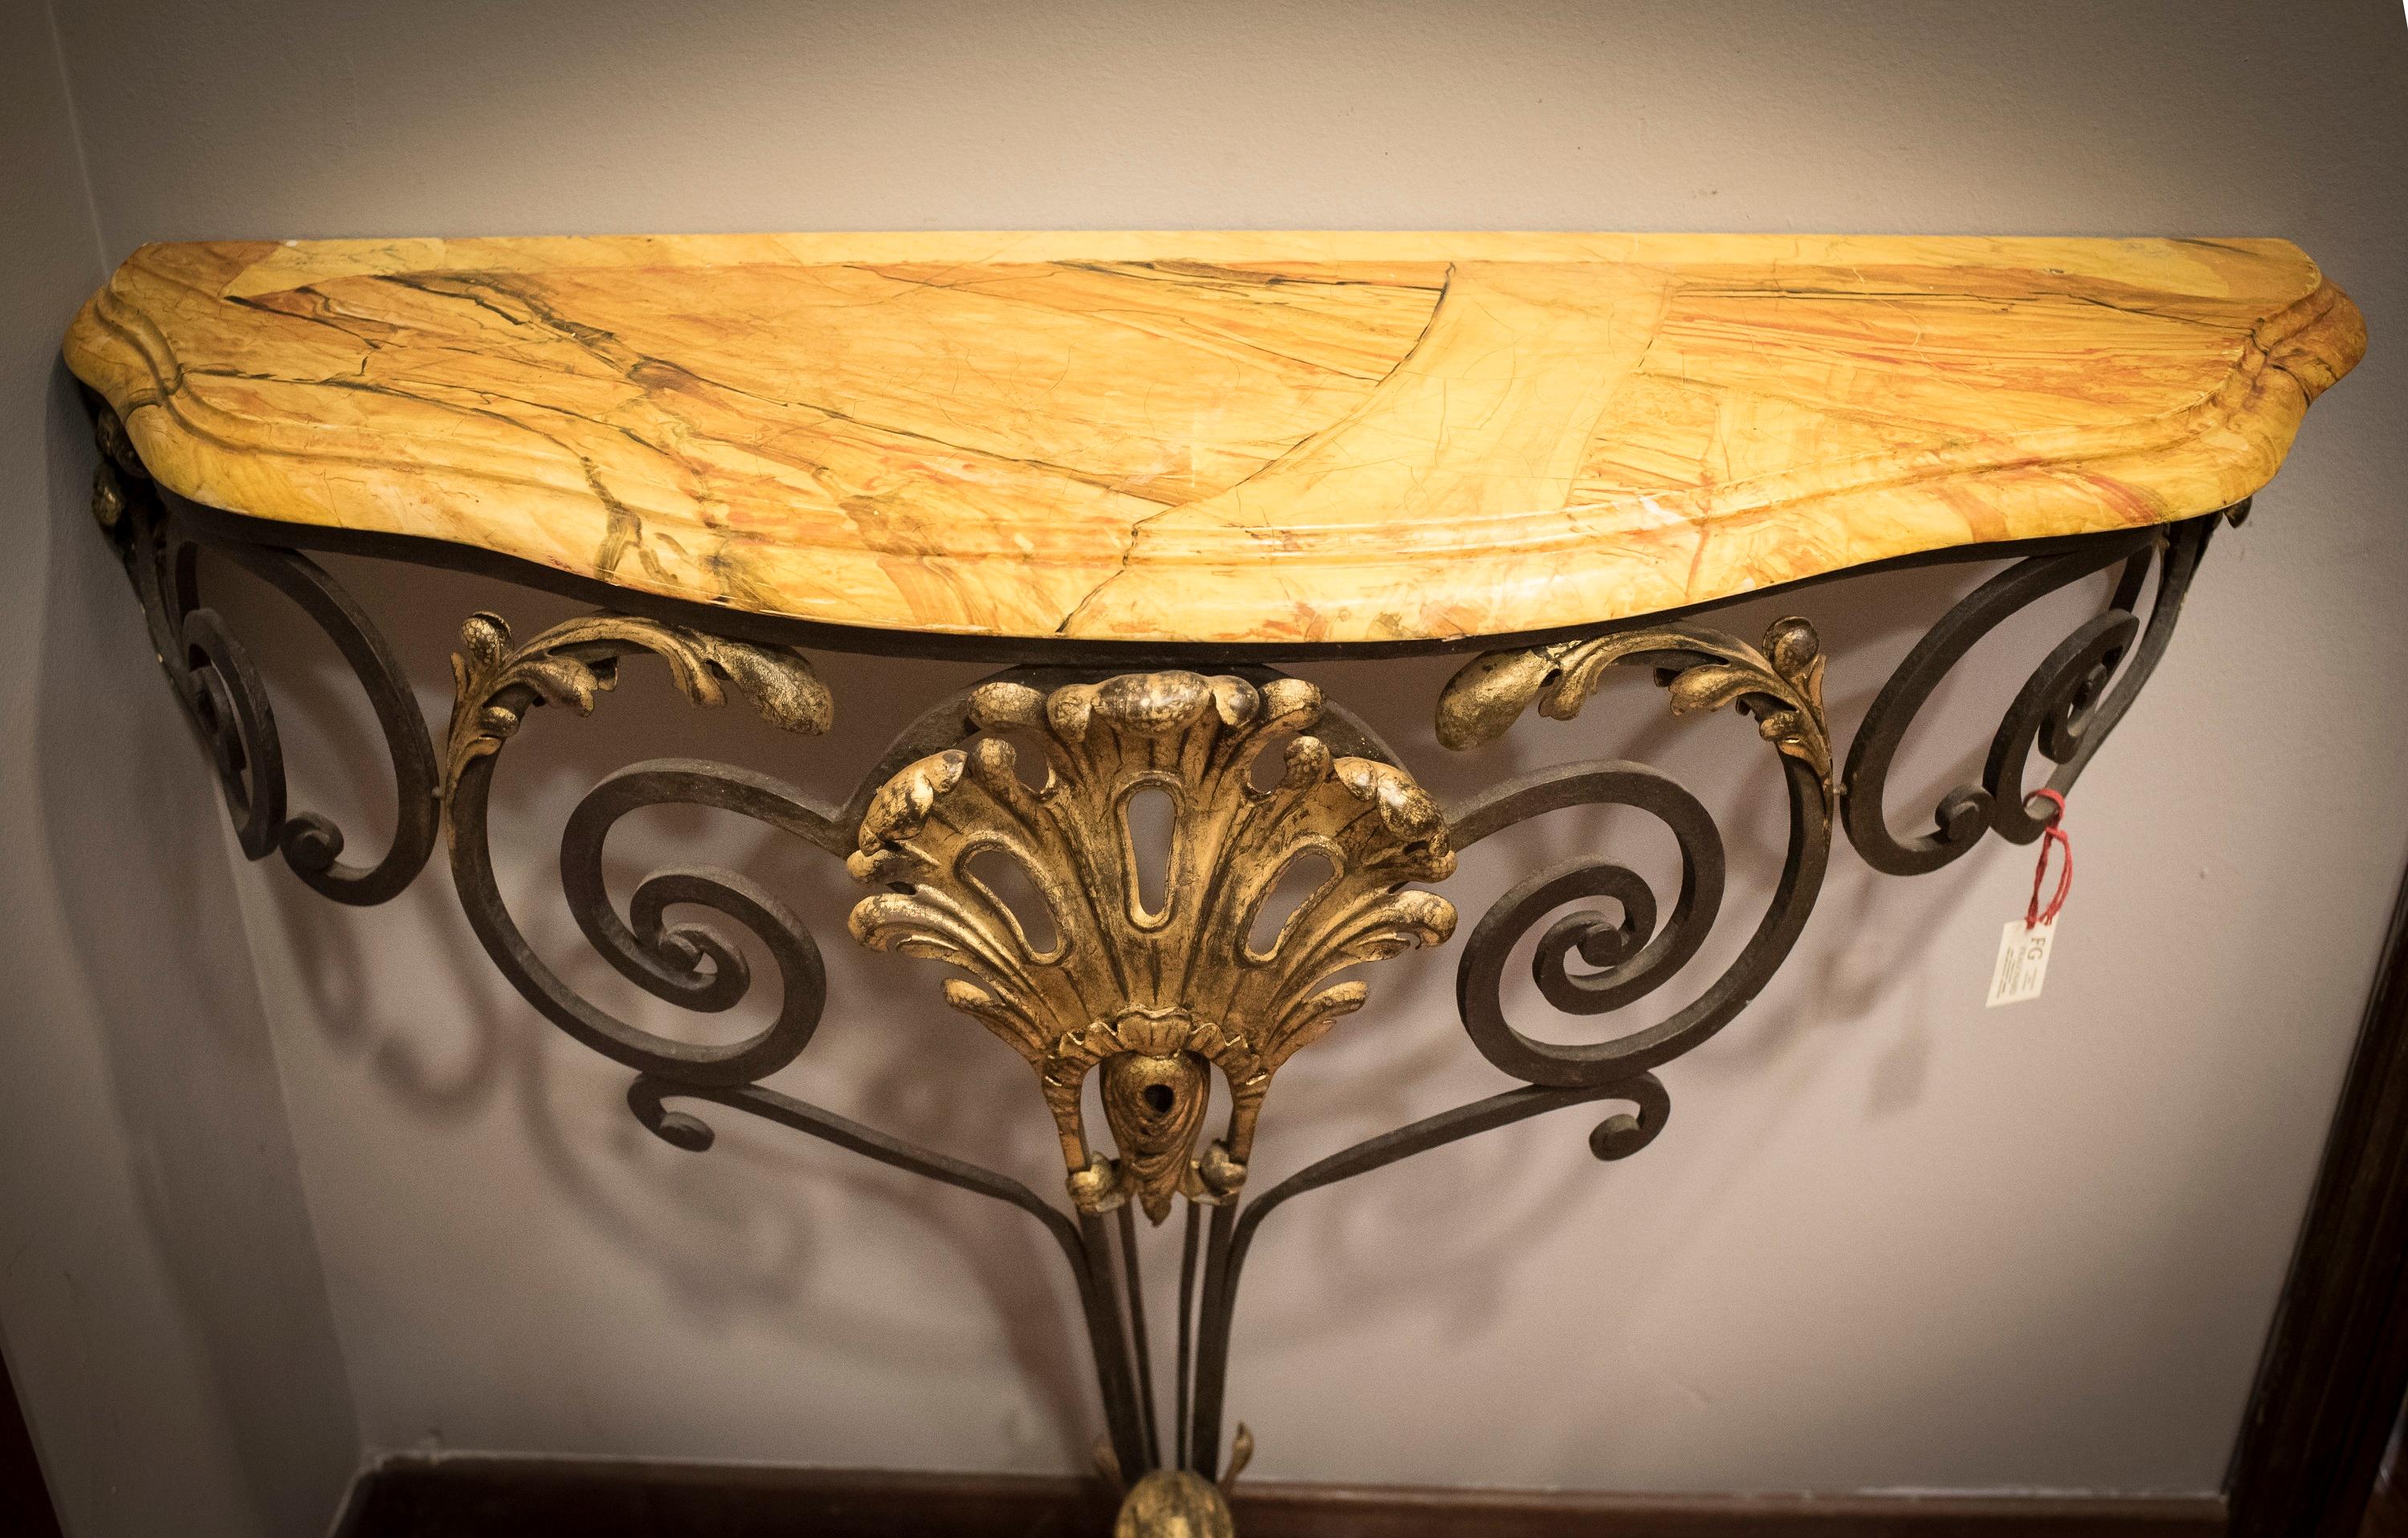 Awesome French wrought iron and yellow marbled wood top table, making a trompe l´oeil . With gold some places in the iron. A touch of timeless and fresh elegance.